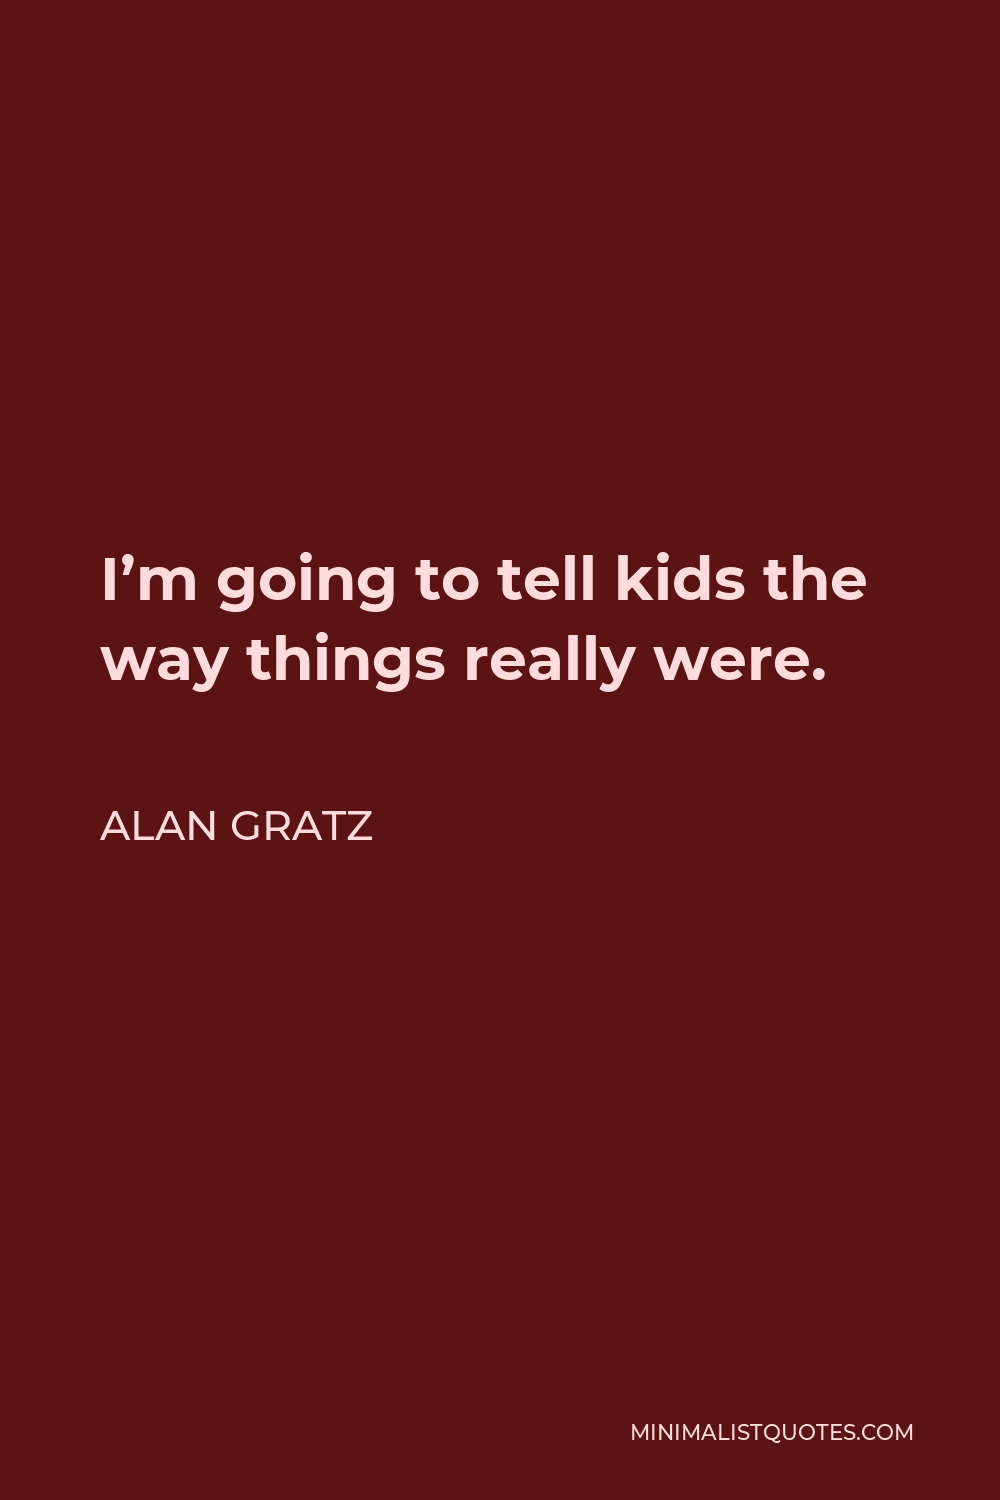 Alan Gratz Quote - I’m going to tell kids the way things really were.